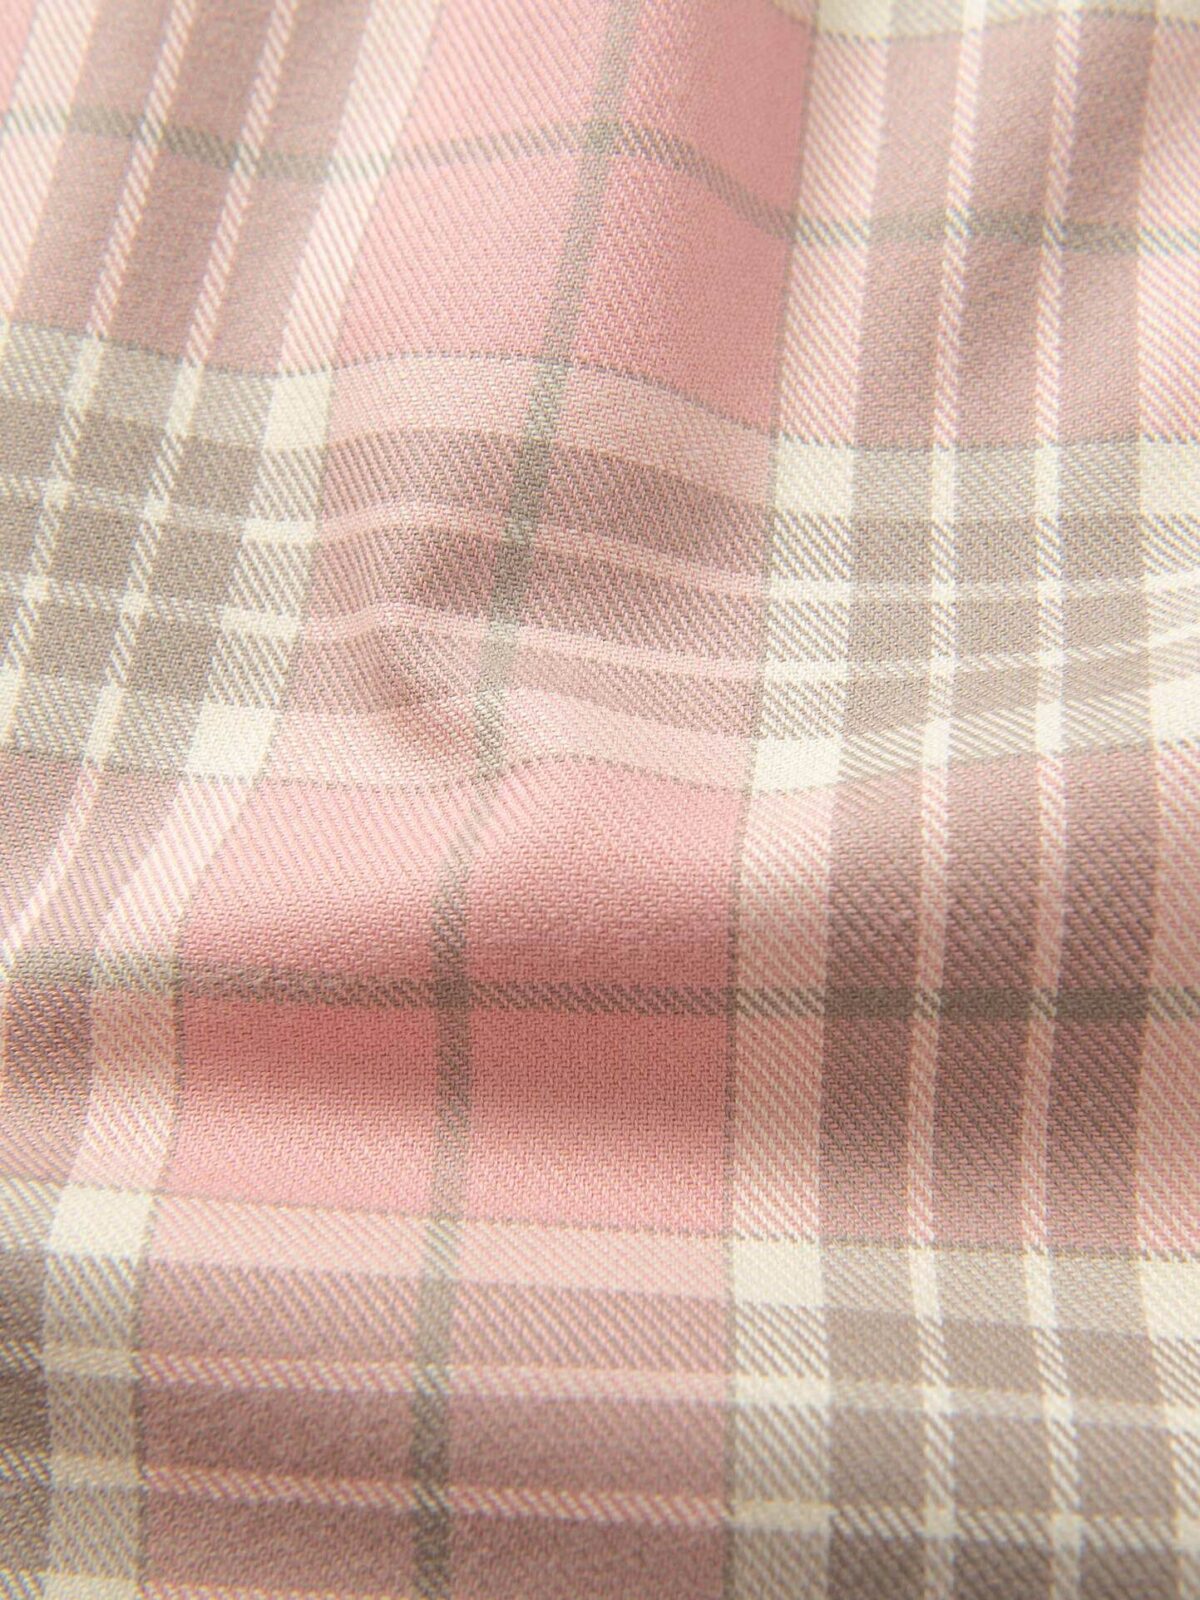 Vintage Rose and Brown California Plaid Shirts by Proper Cloth